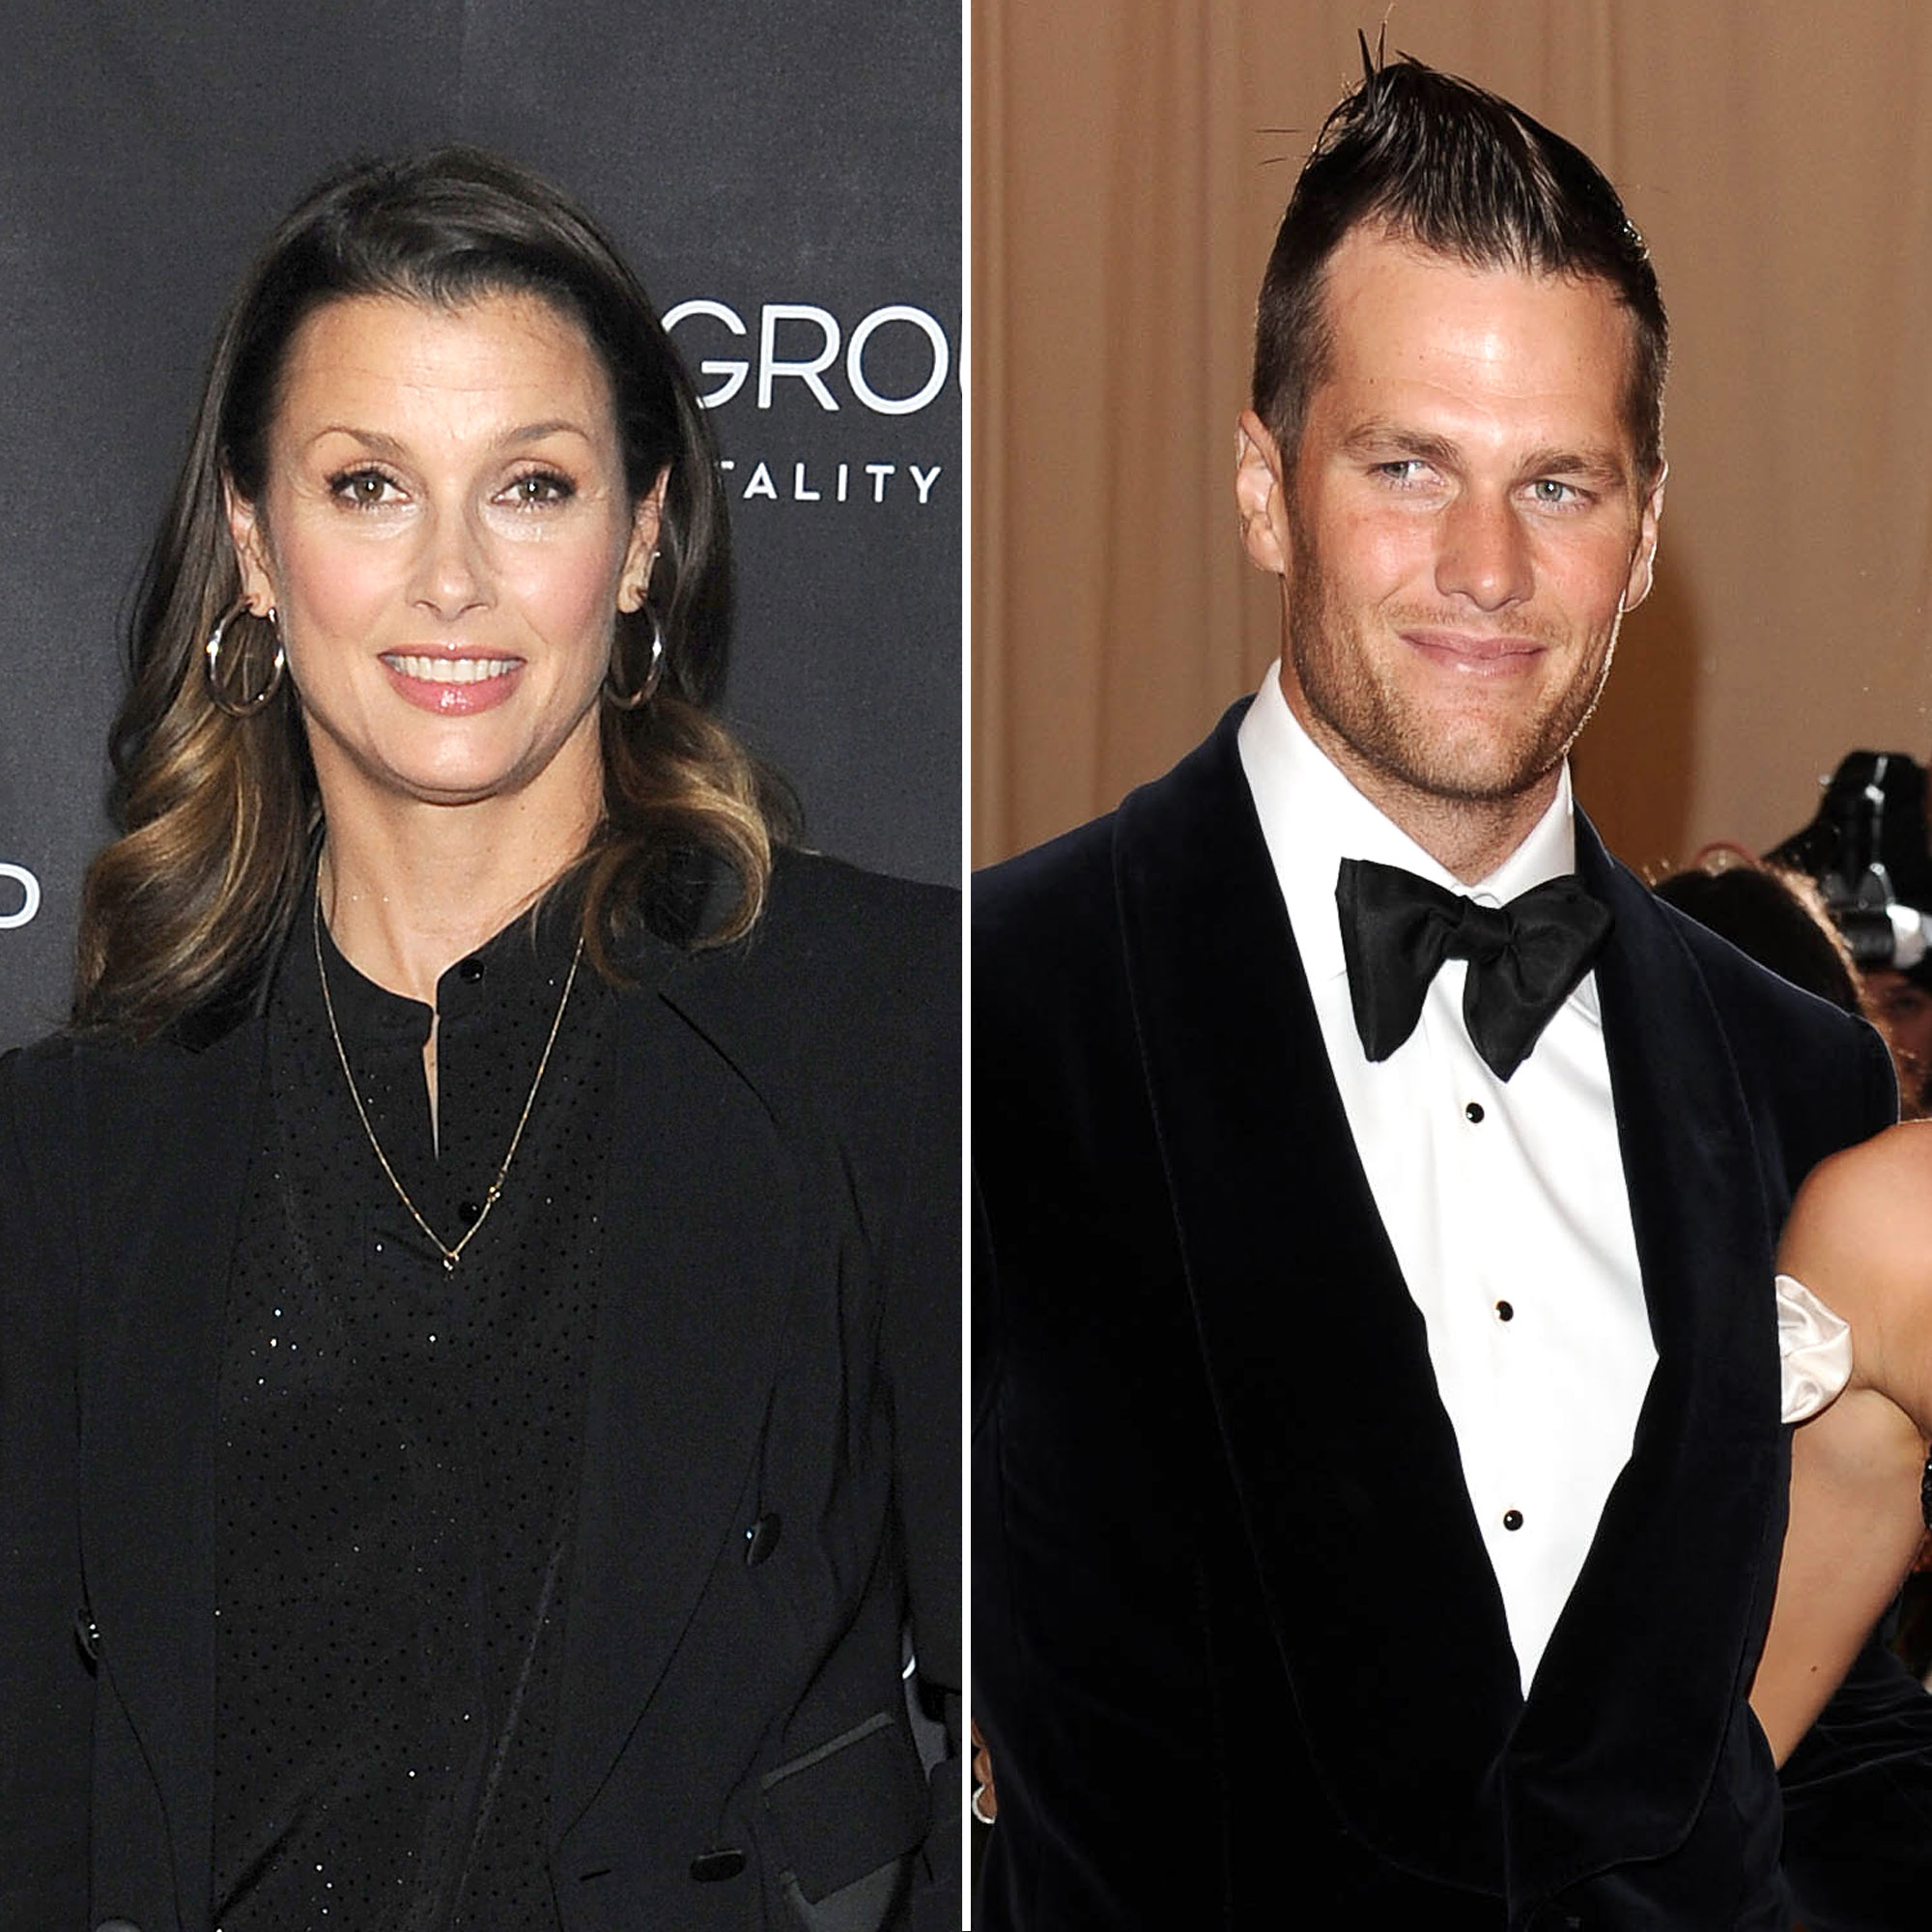 Bridget Moynahan says she 'had no reservations or insecurities